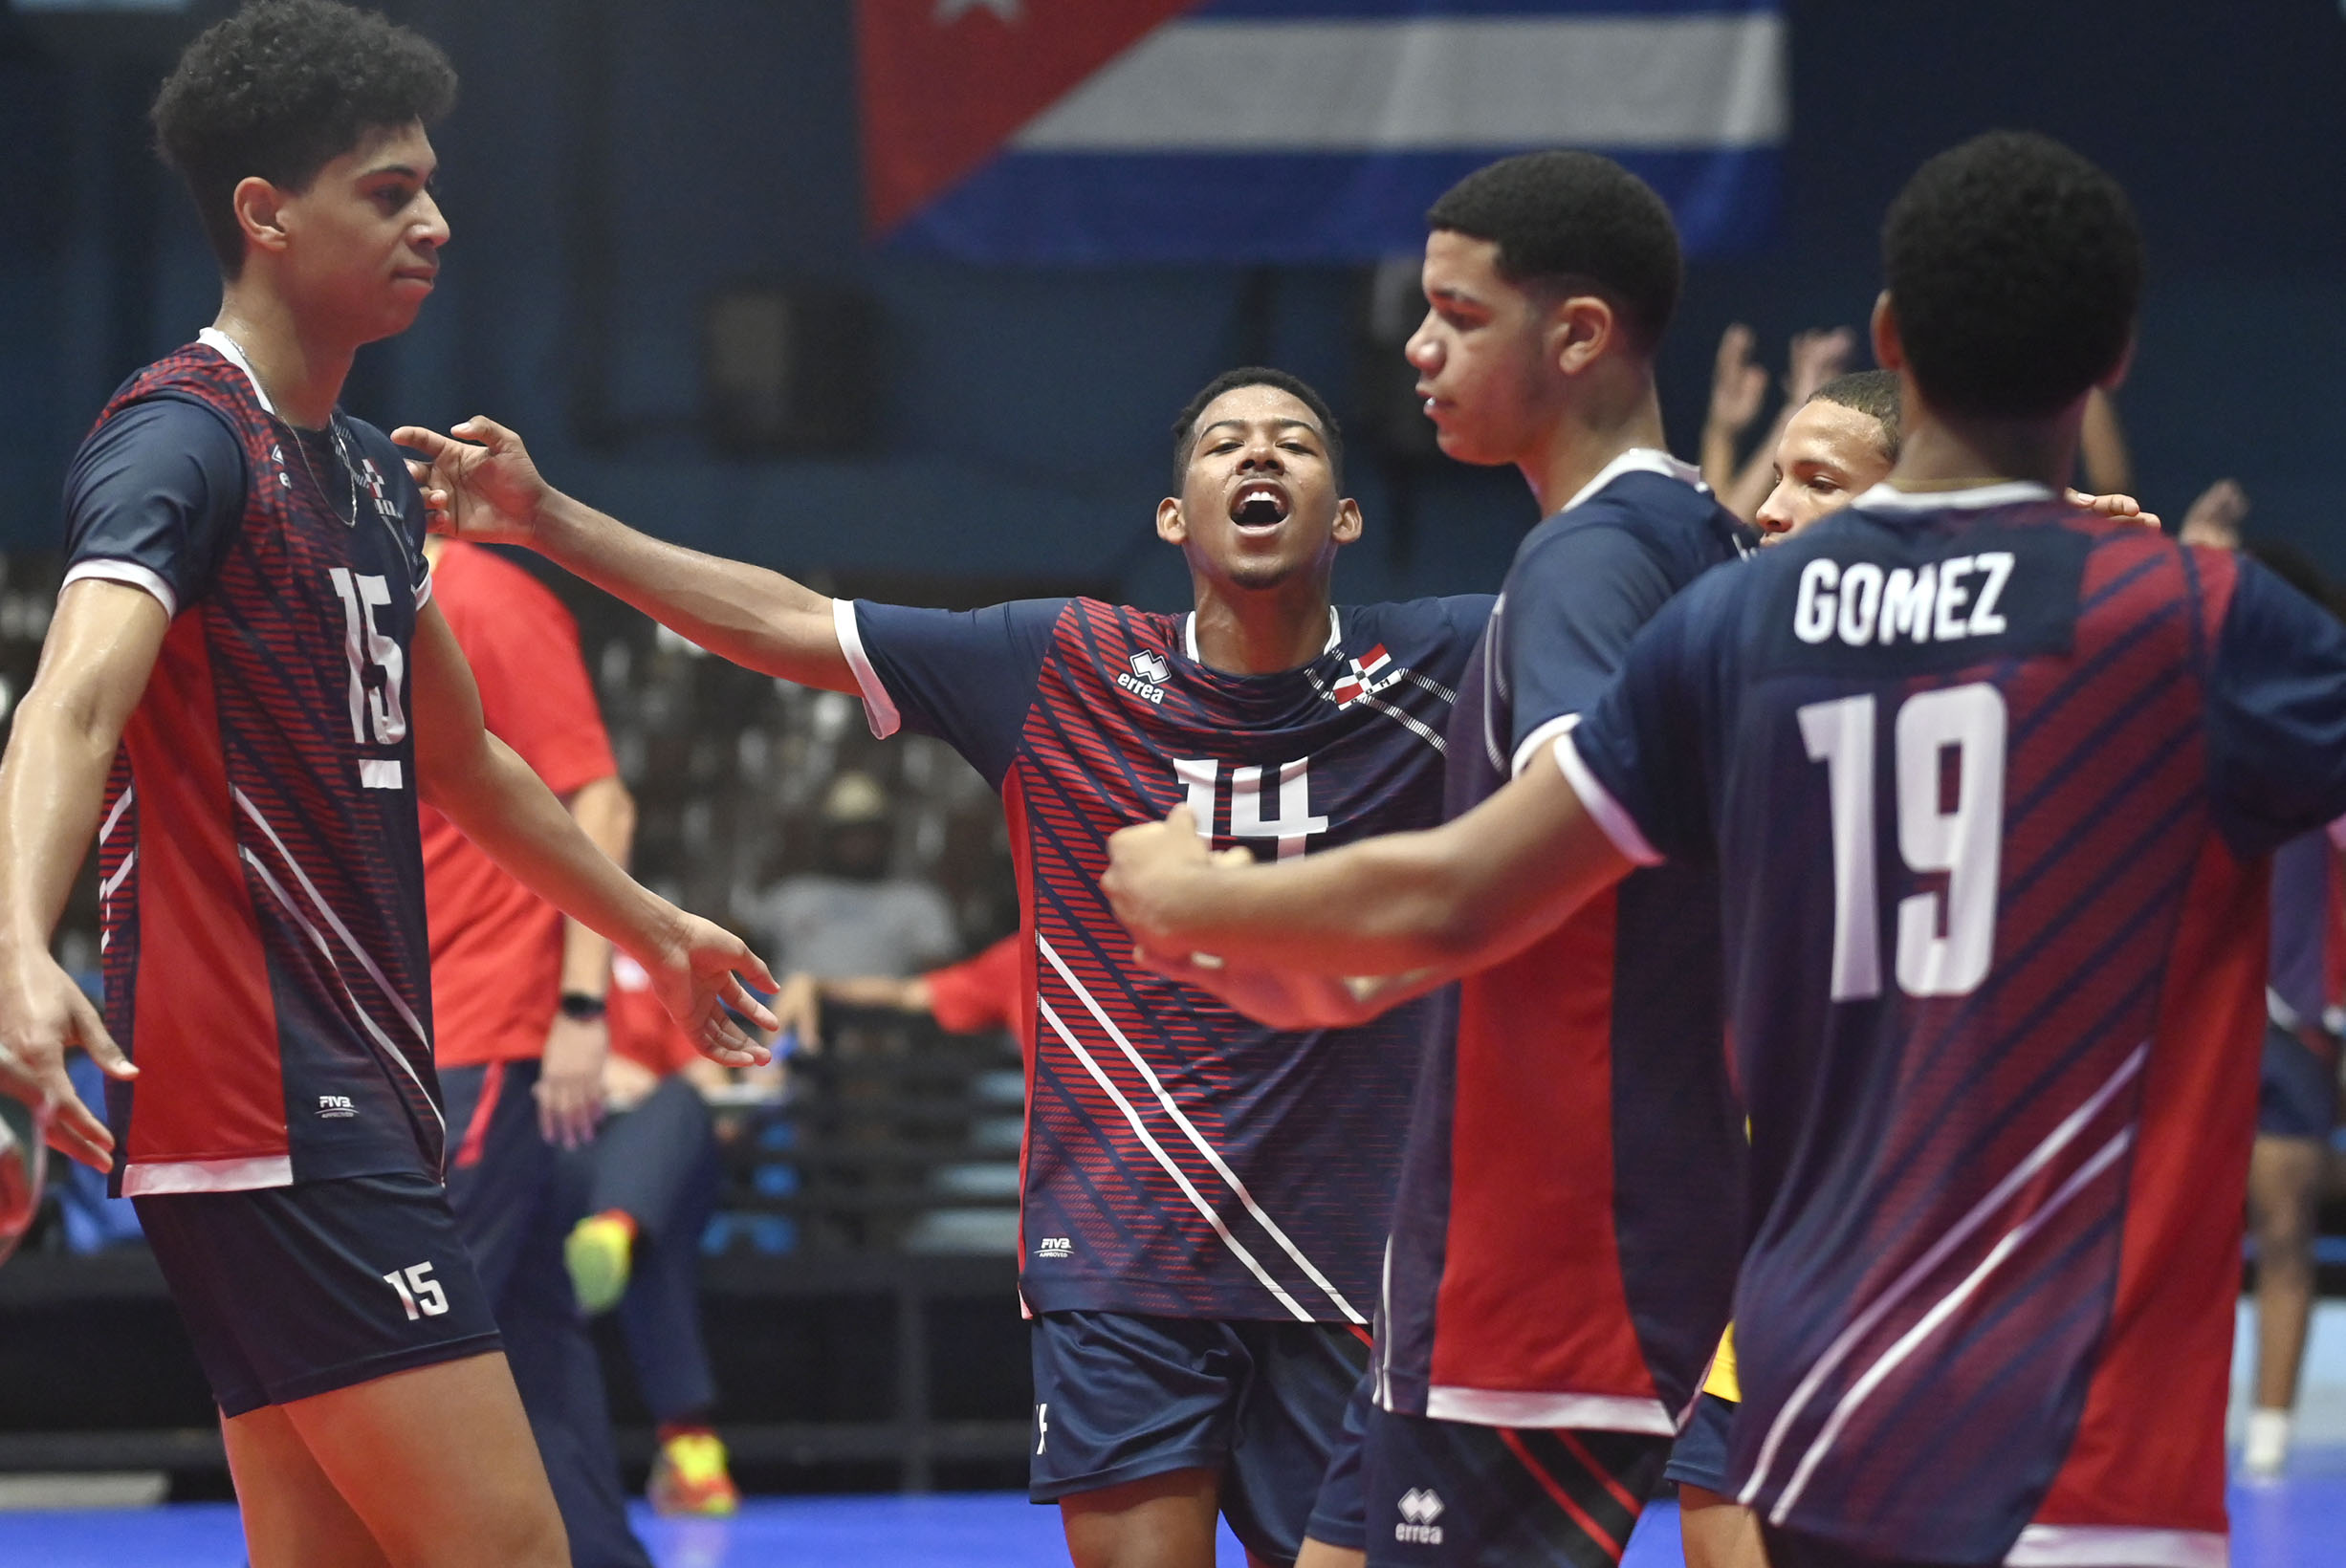 Dominicans won over Haiti to play for fifth place at U21 Pan American Cup